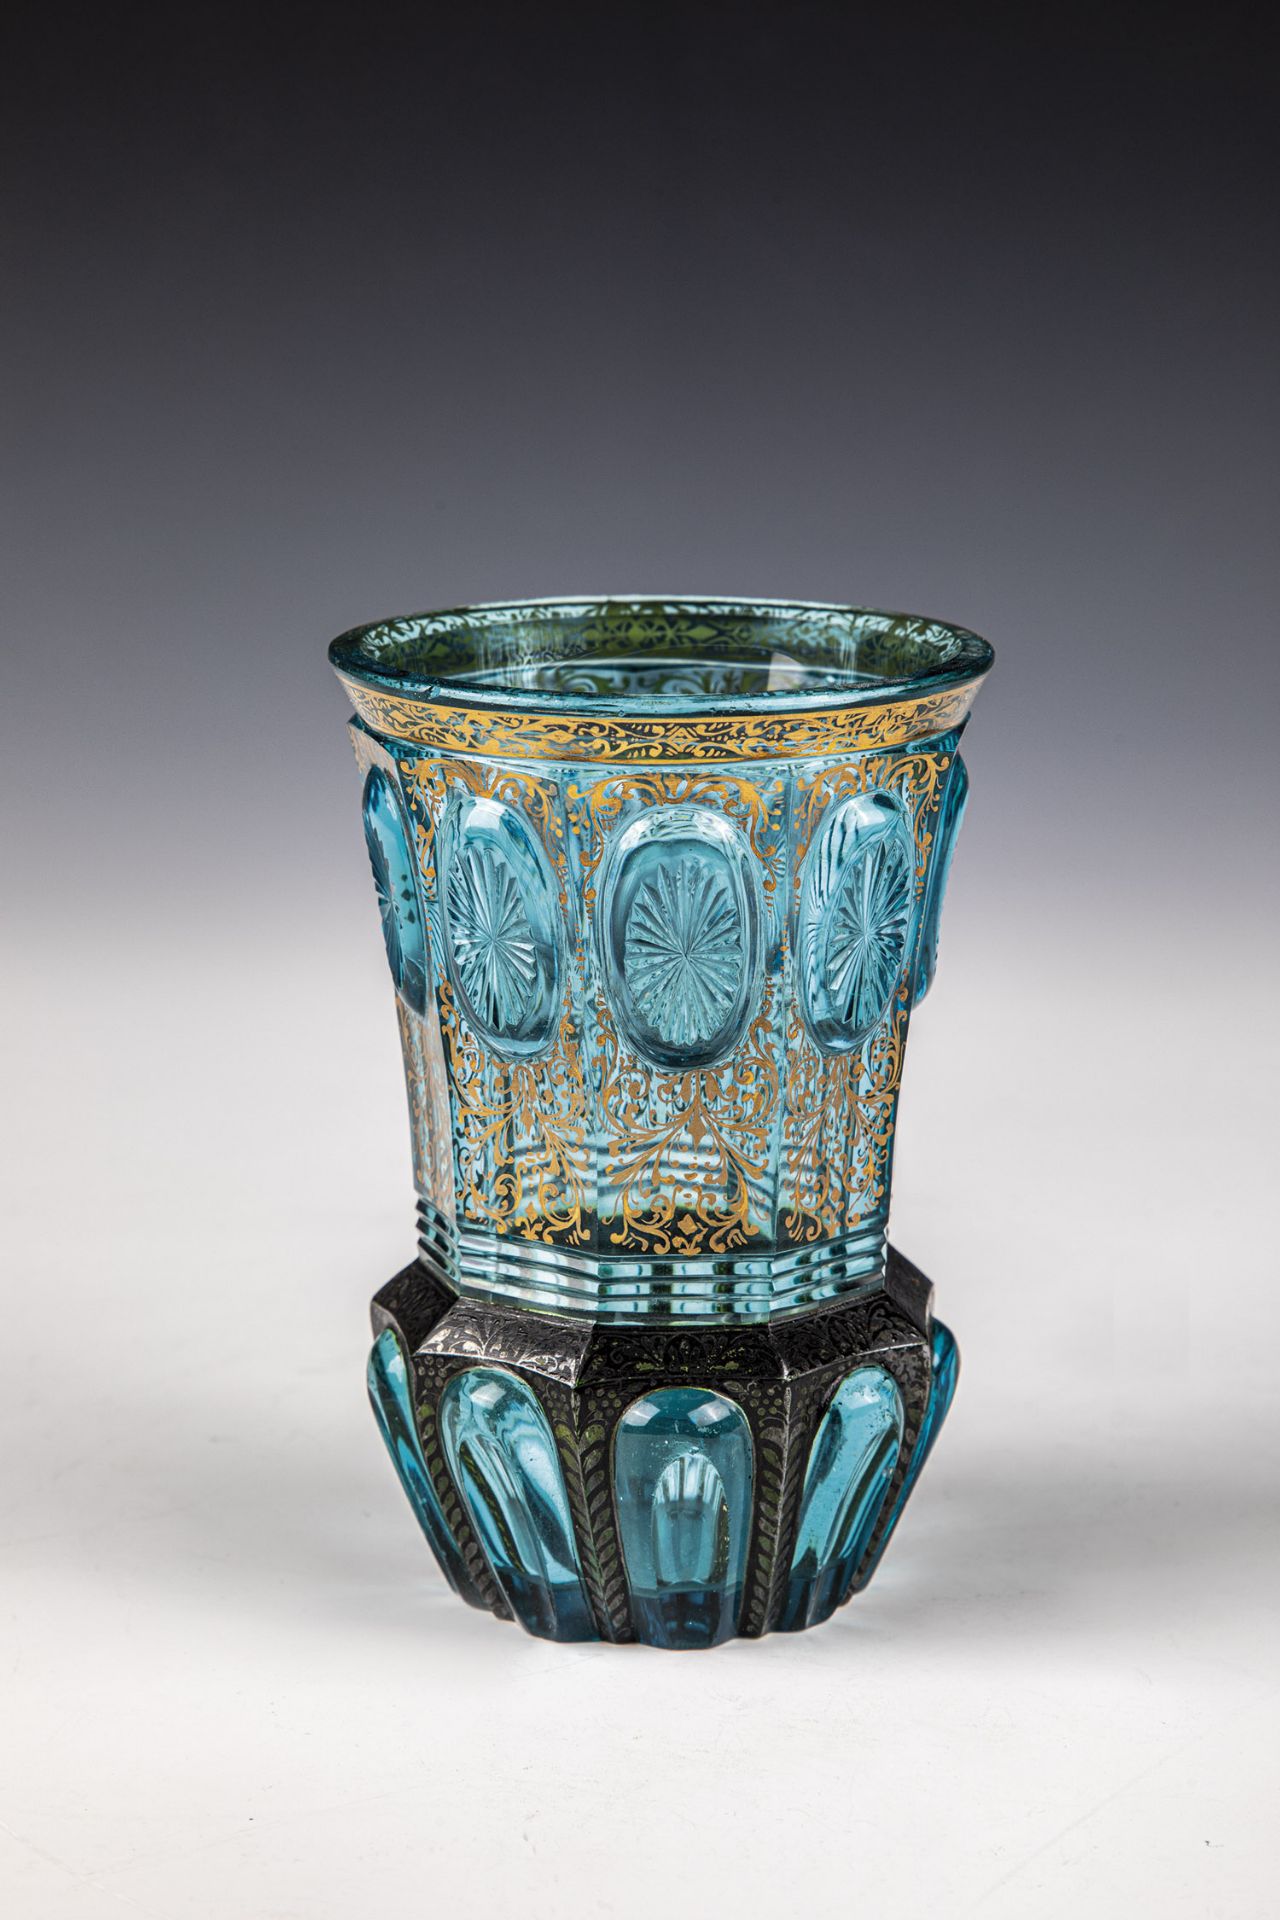 Ranftbecher Russia or Harrach around 1820 Turquoise glass. Floor with sanded tear-off and ribbed